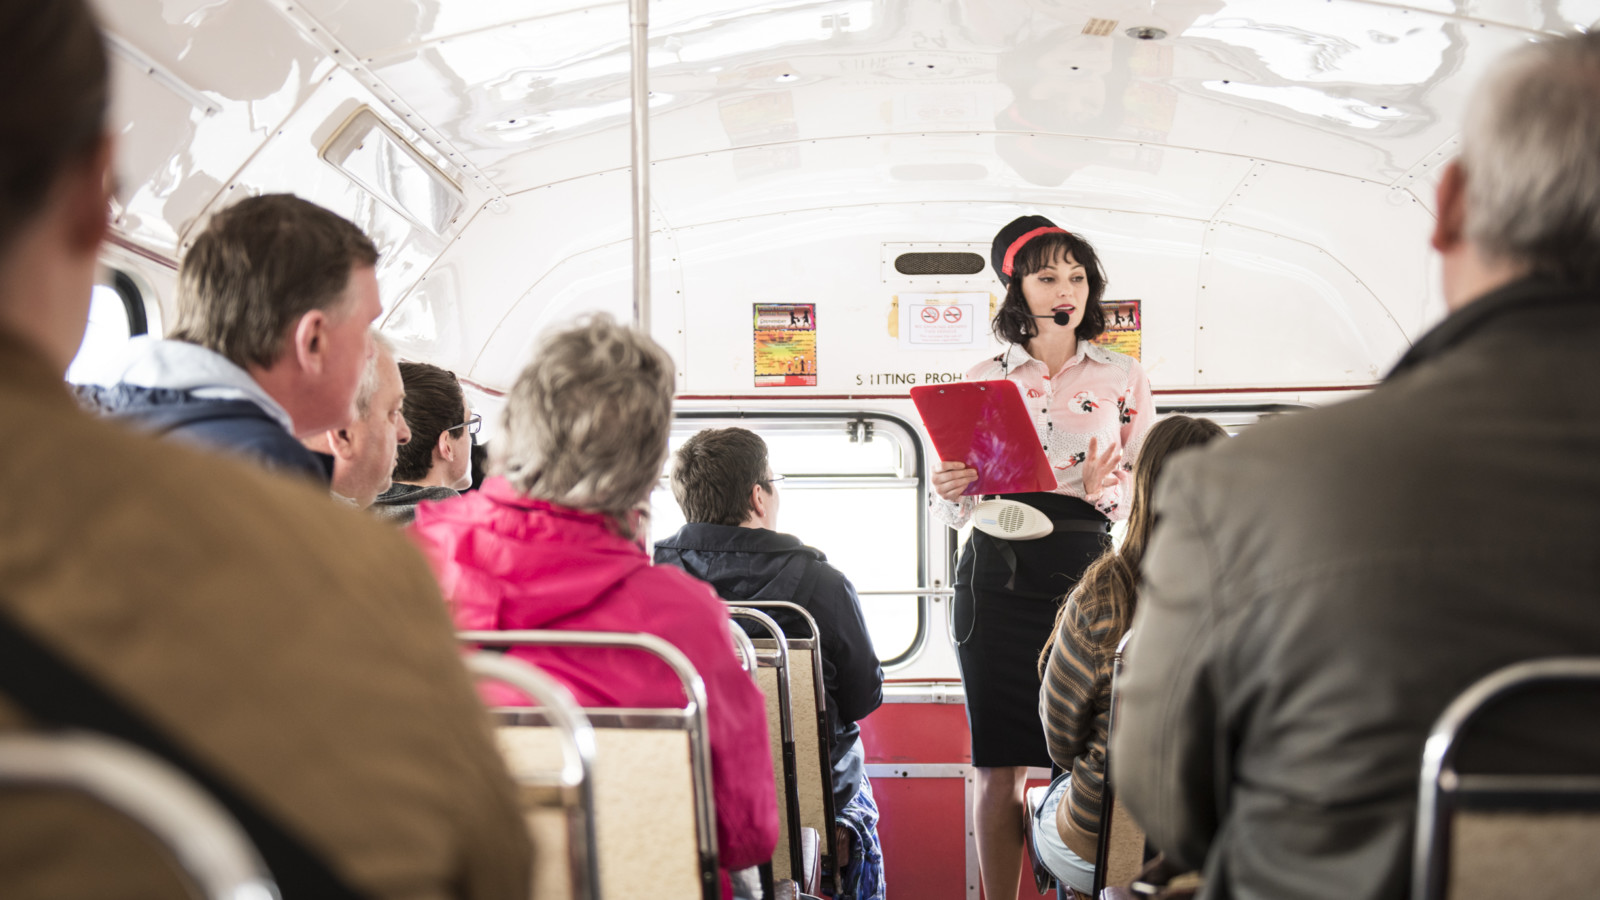 The artists Lowri Evan stands in a vintage style outfit wearing a headset and holding a clipboard on the top deck of a bus. talking to an audience of people sitting in the bus seats